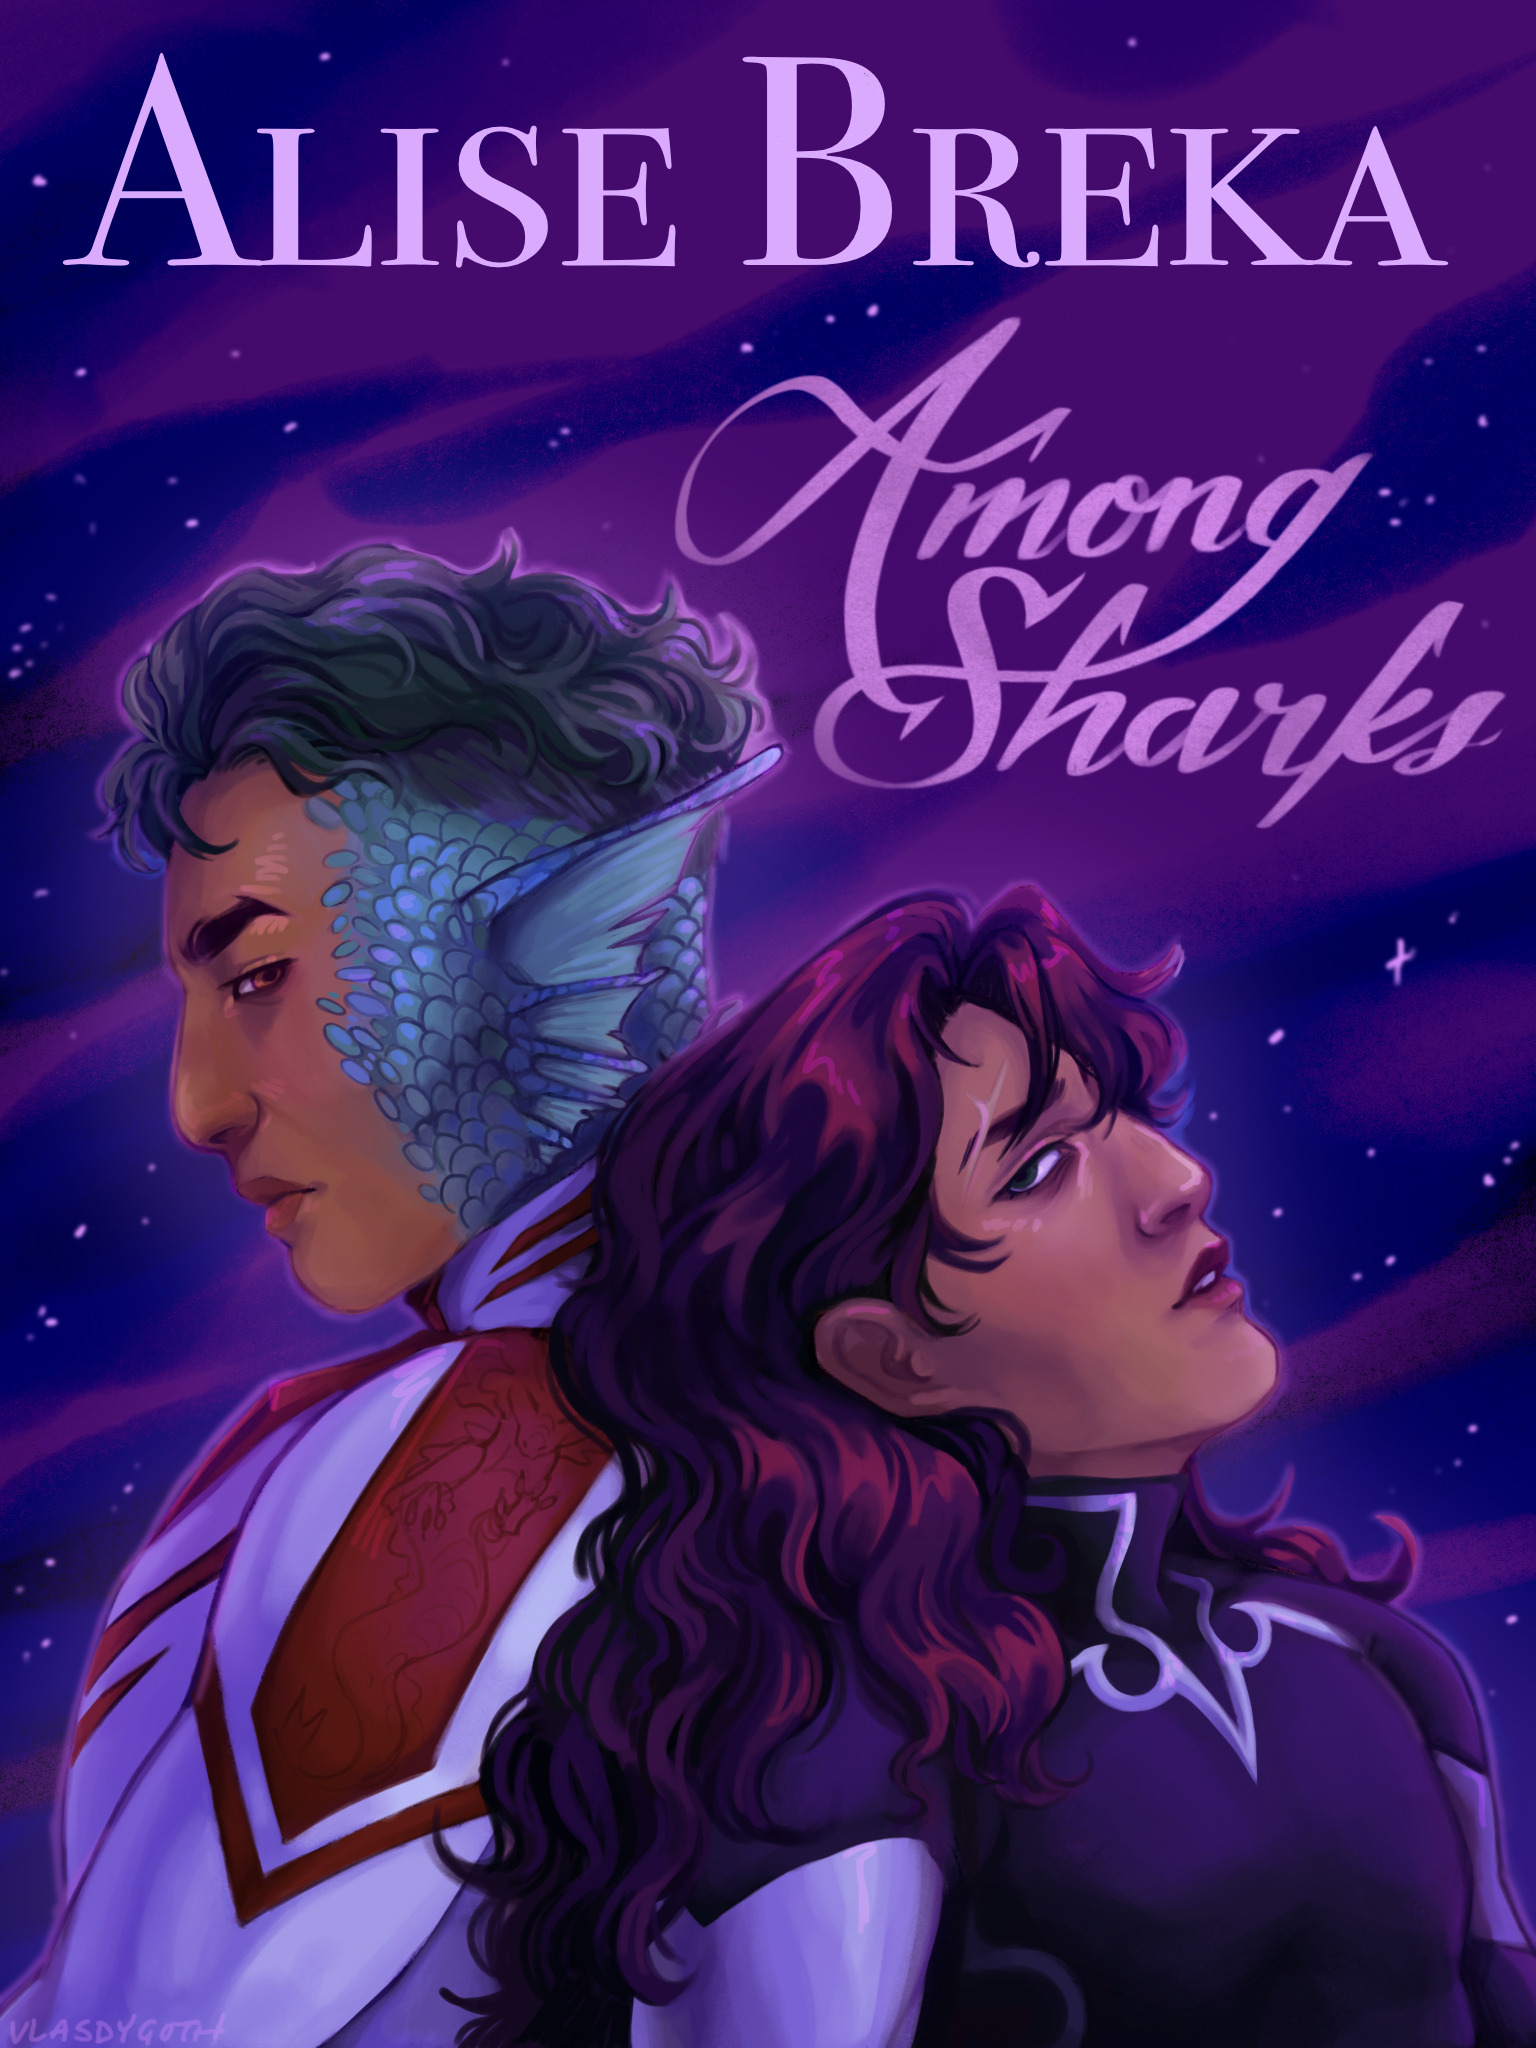 Cover for Among Sharks. Miseri and Cor'rina stand back-to-back in front of a nebula